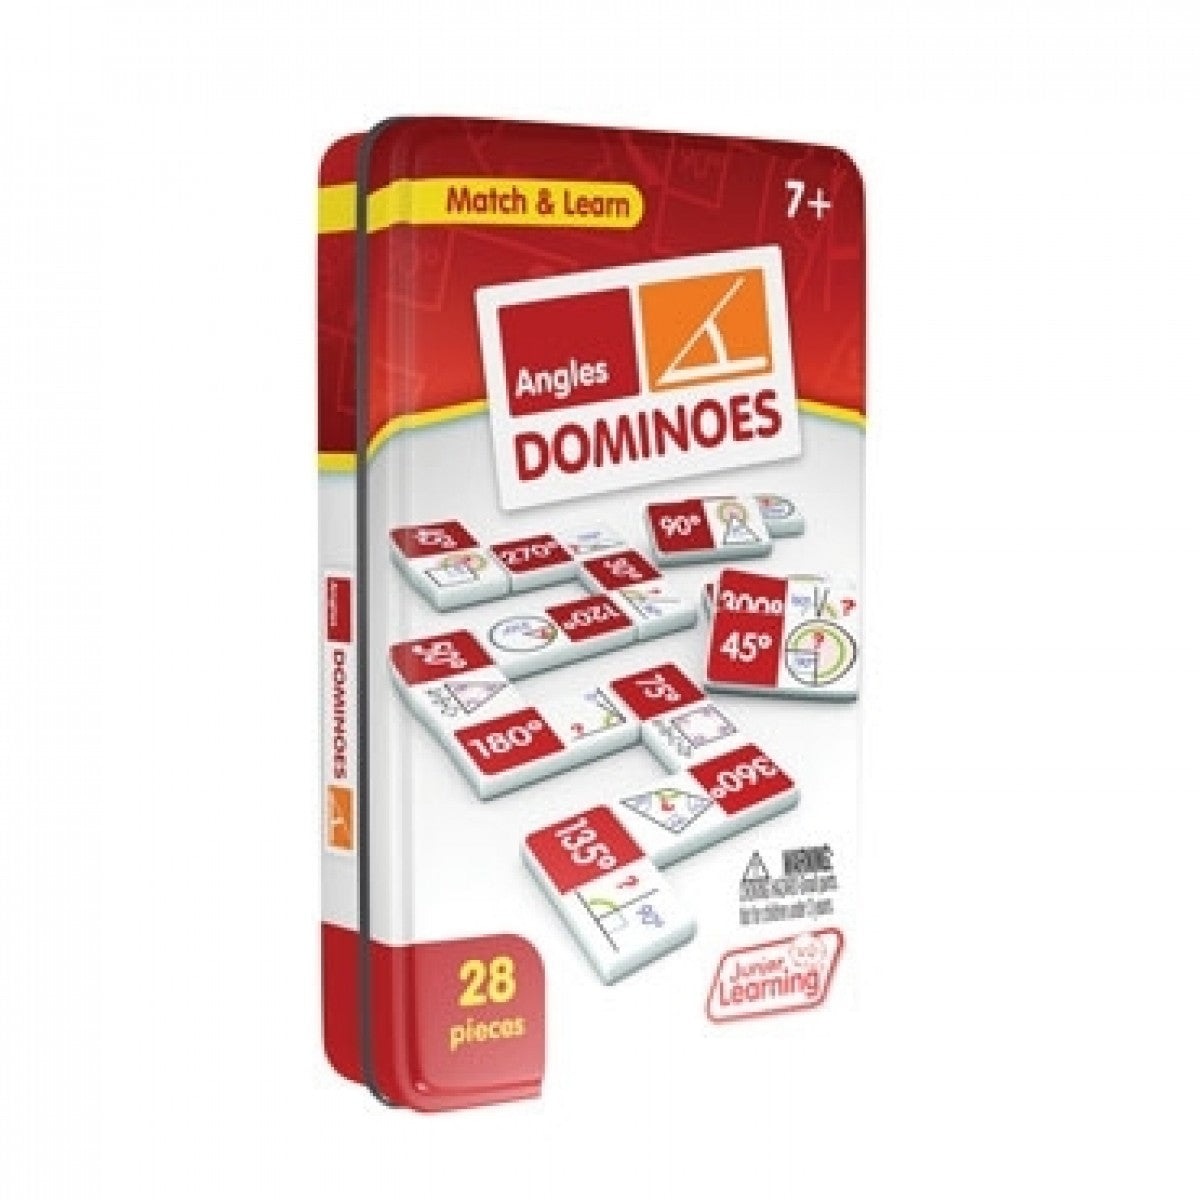 Angles Dominoes by Junior Learning